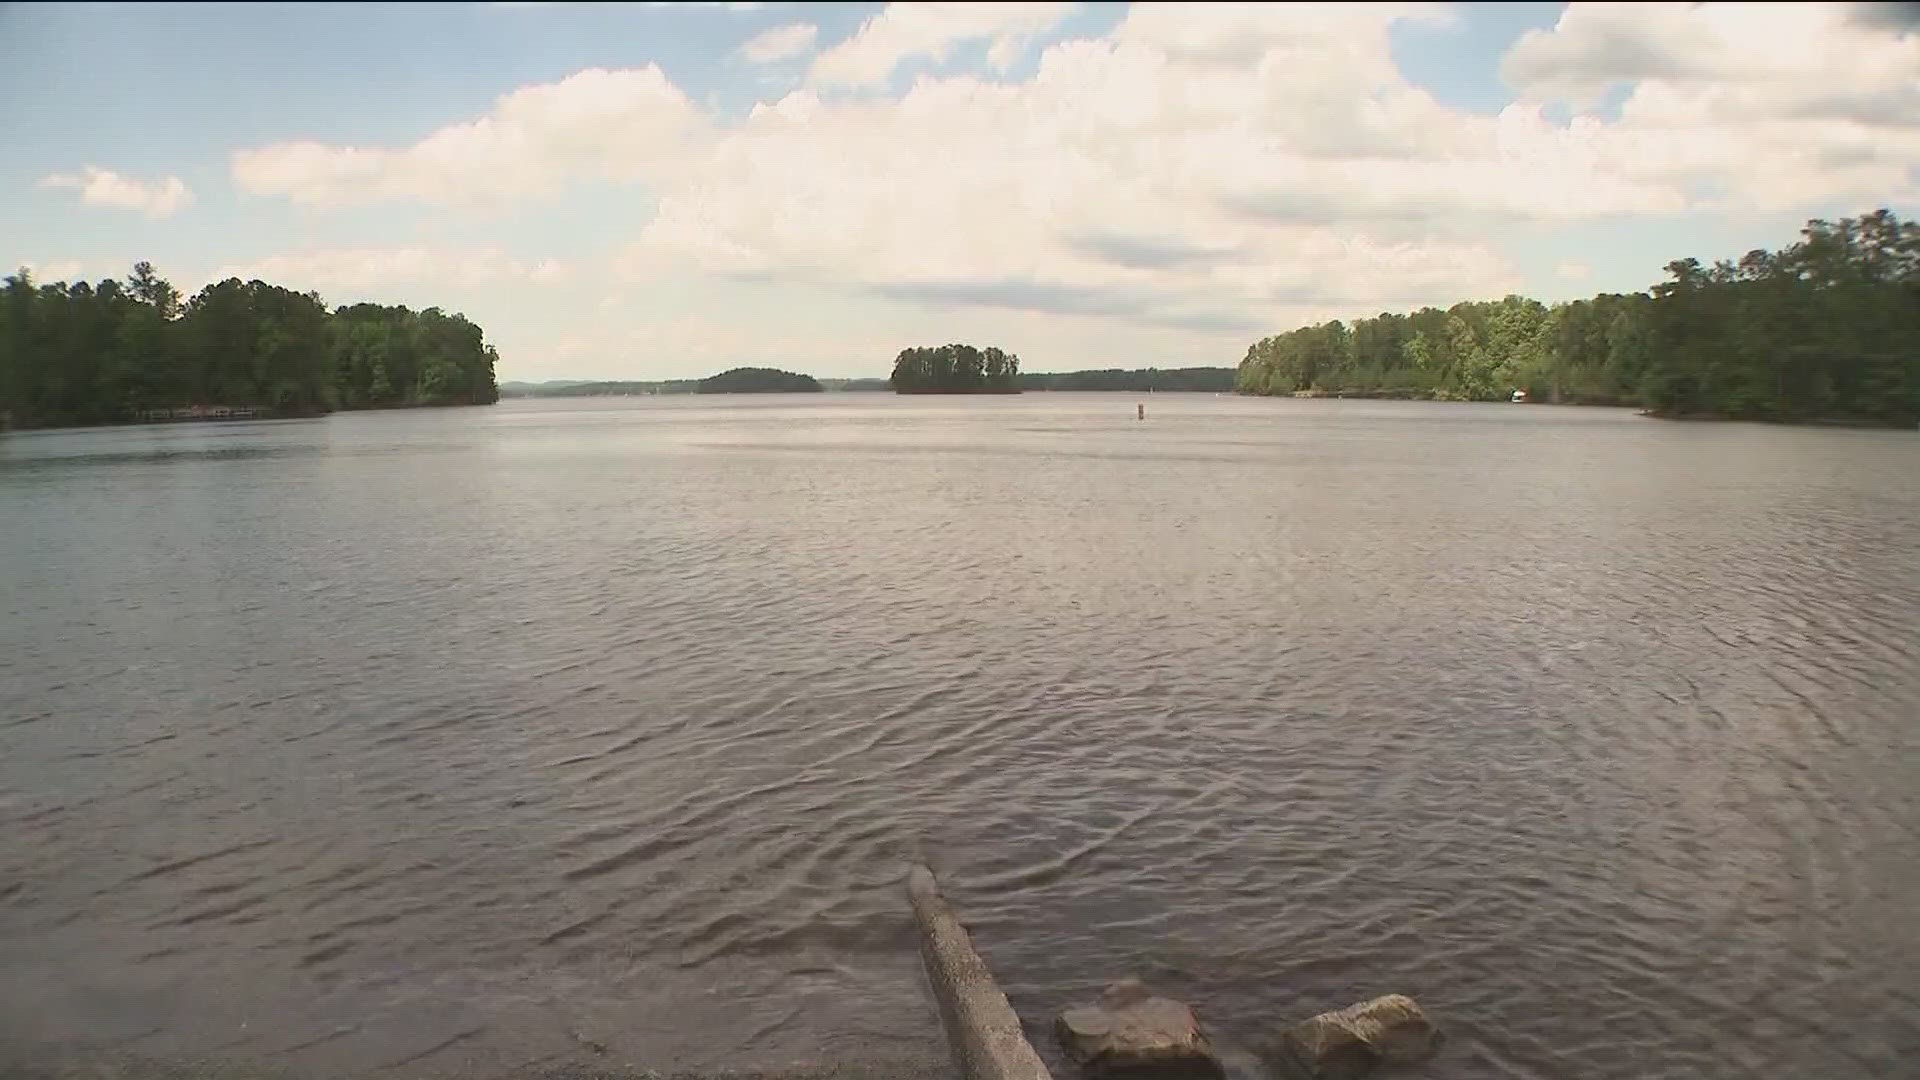 The plans to rename the lake and dam are due to the fact the lake and town are named after former members of the Confederate army.